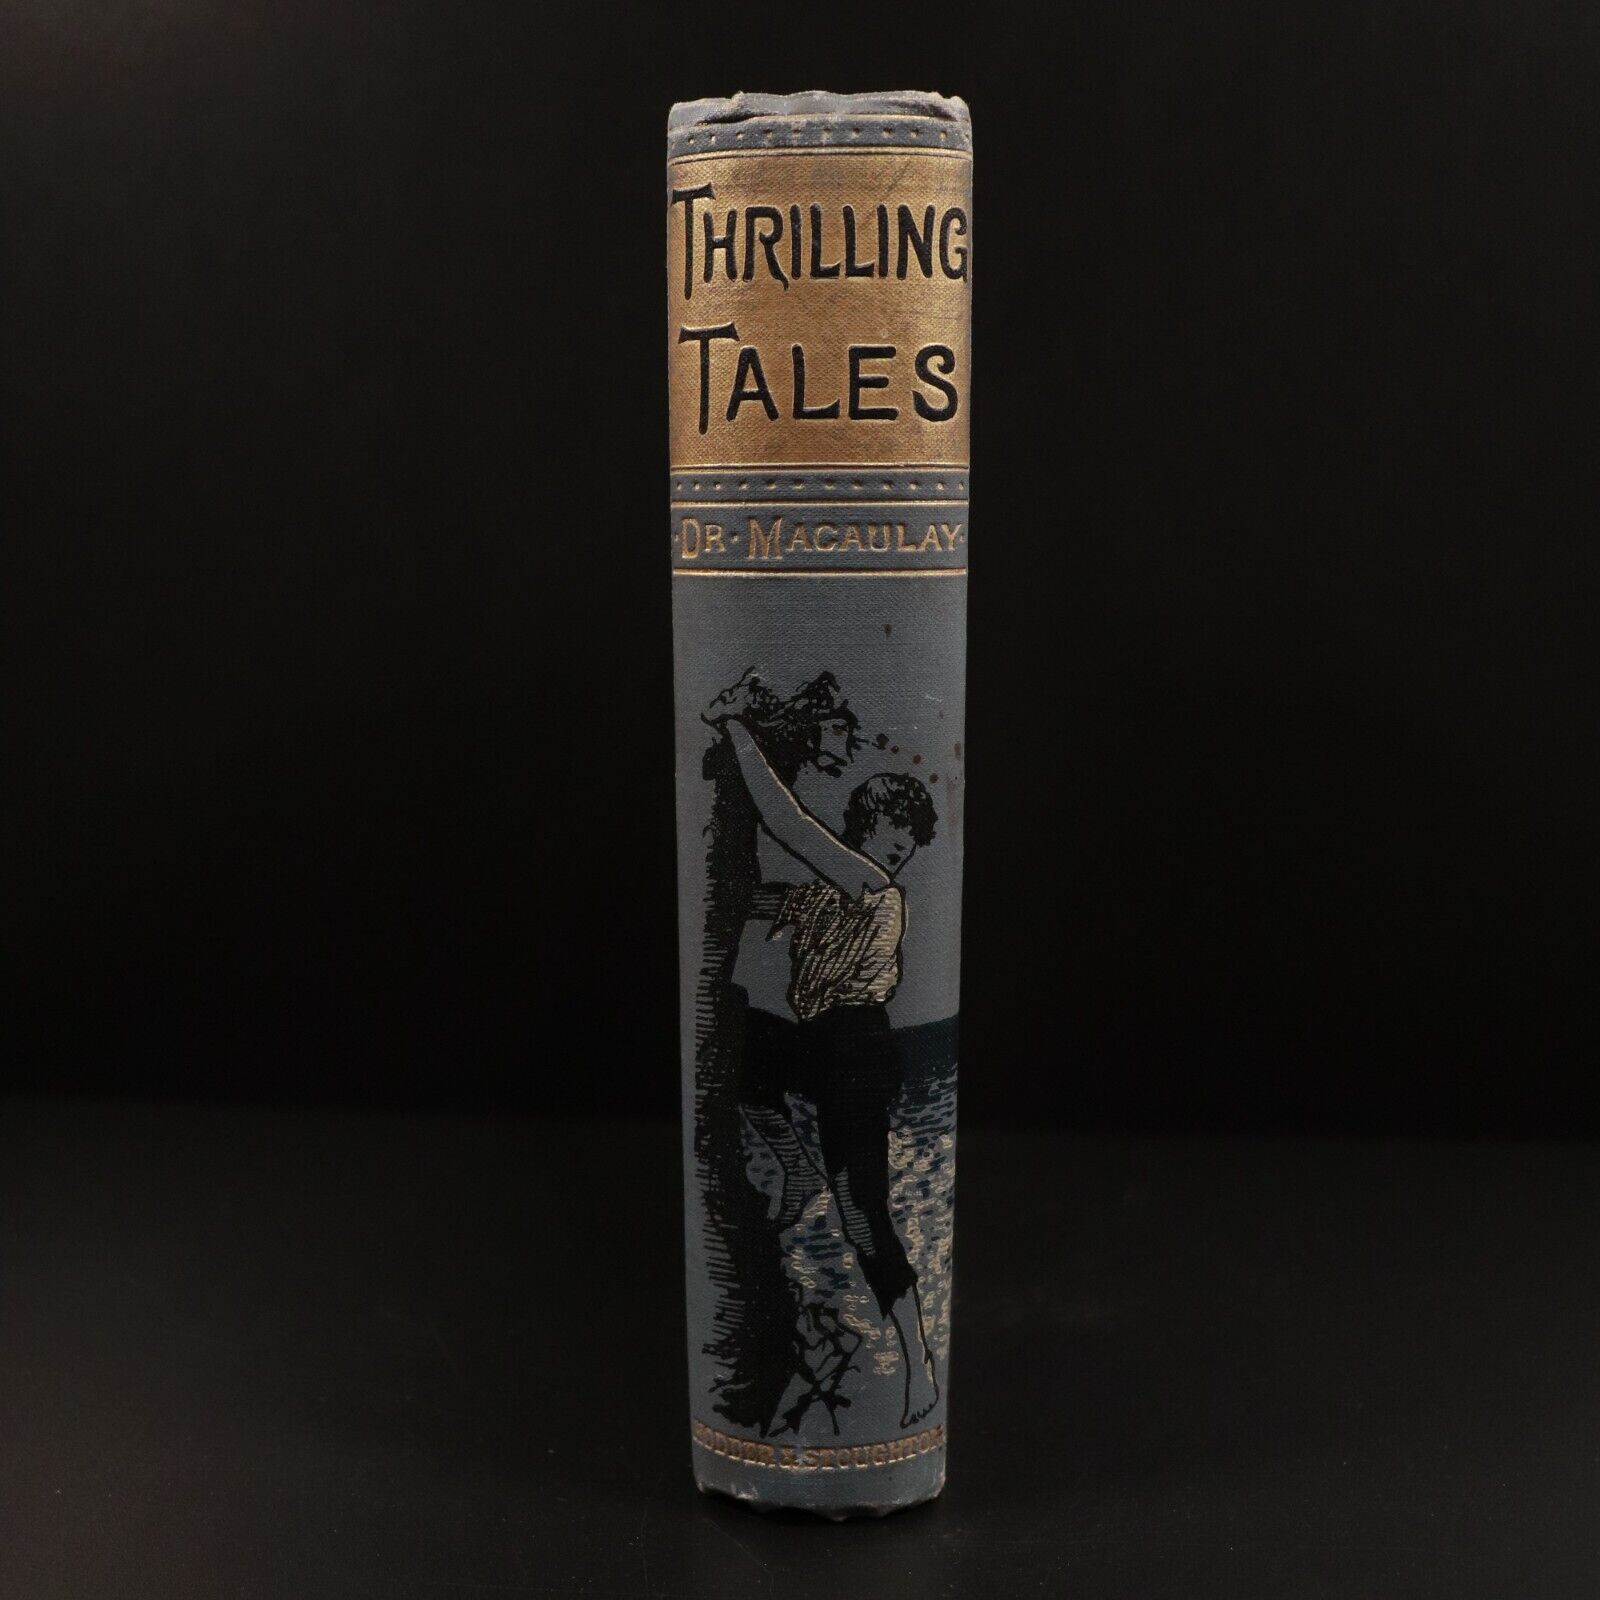 1893 Thrilling Tales by Dr Macaulay Antiquarian Adventure Fiction  Book